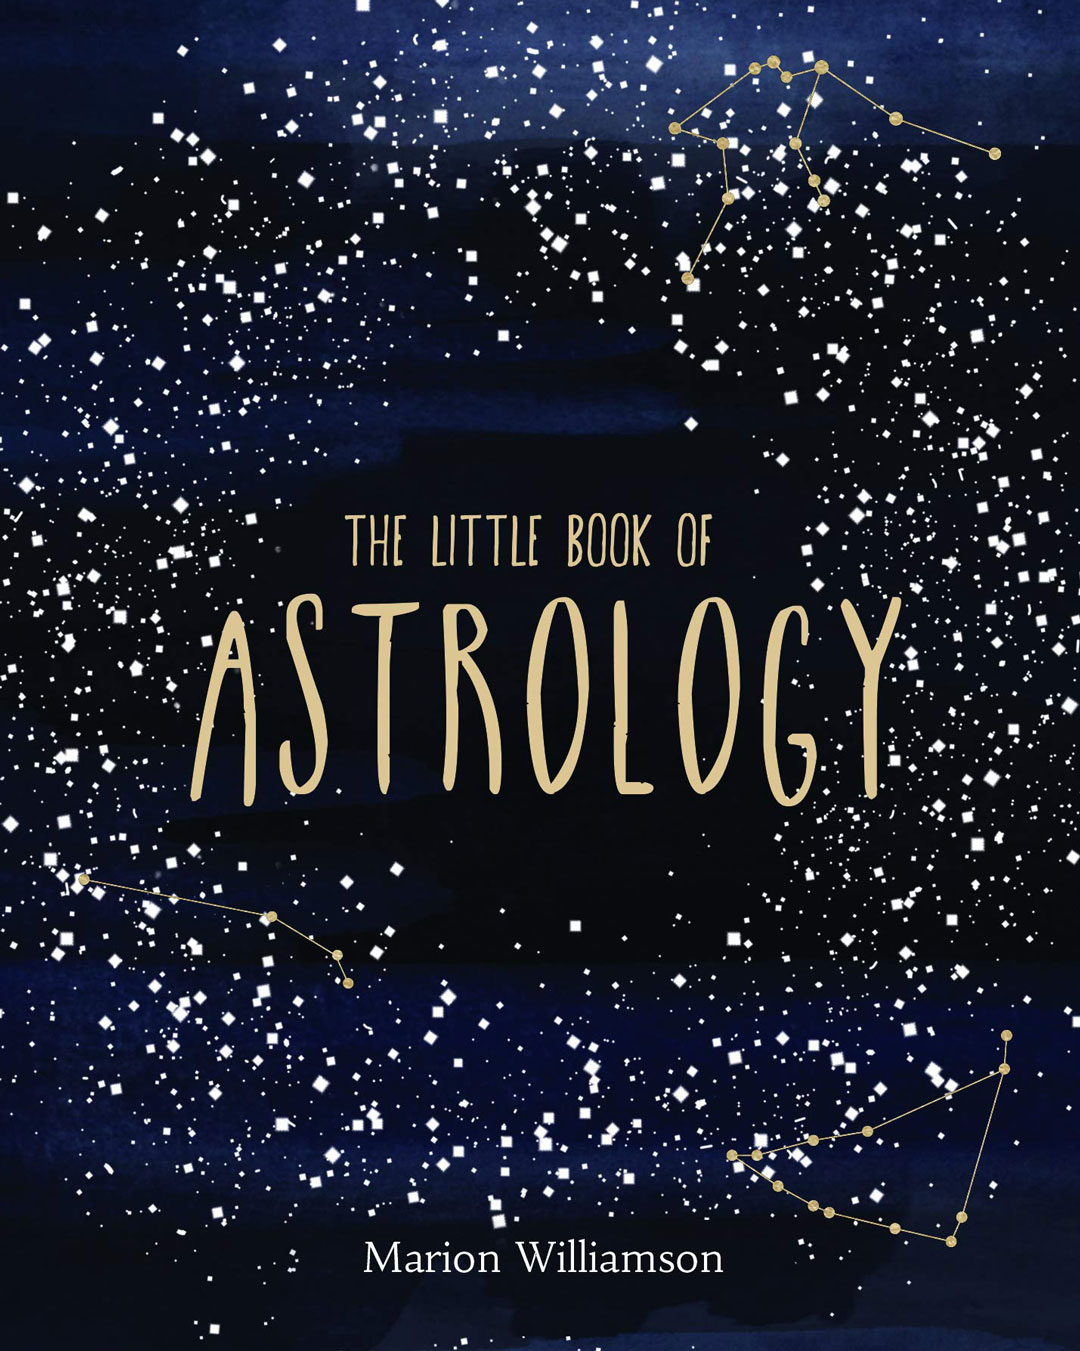 astrology book per day